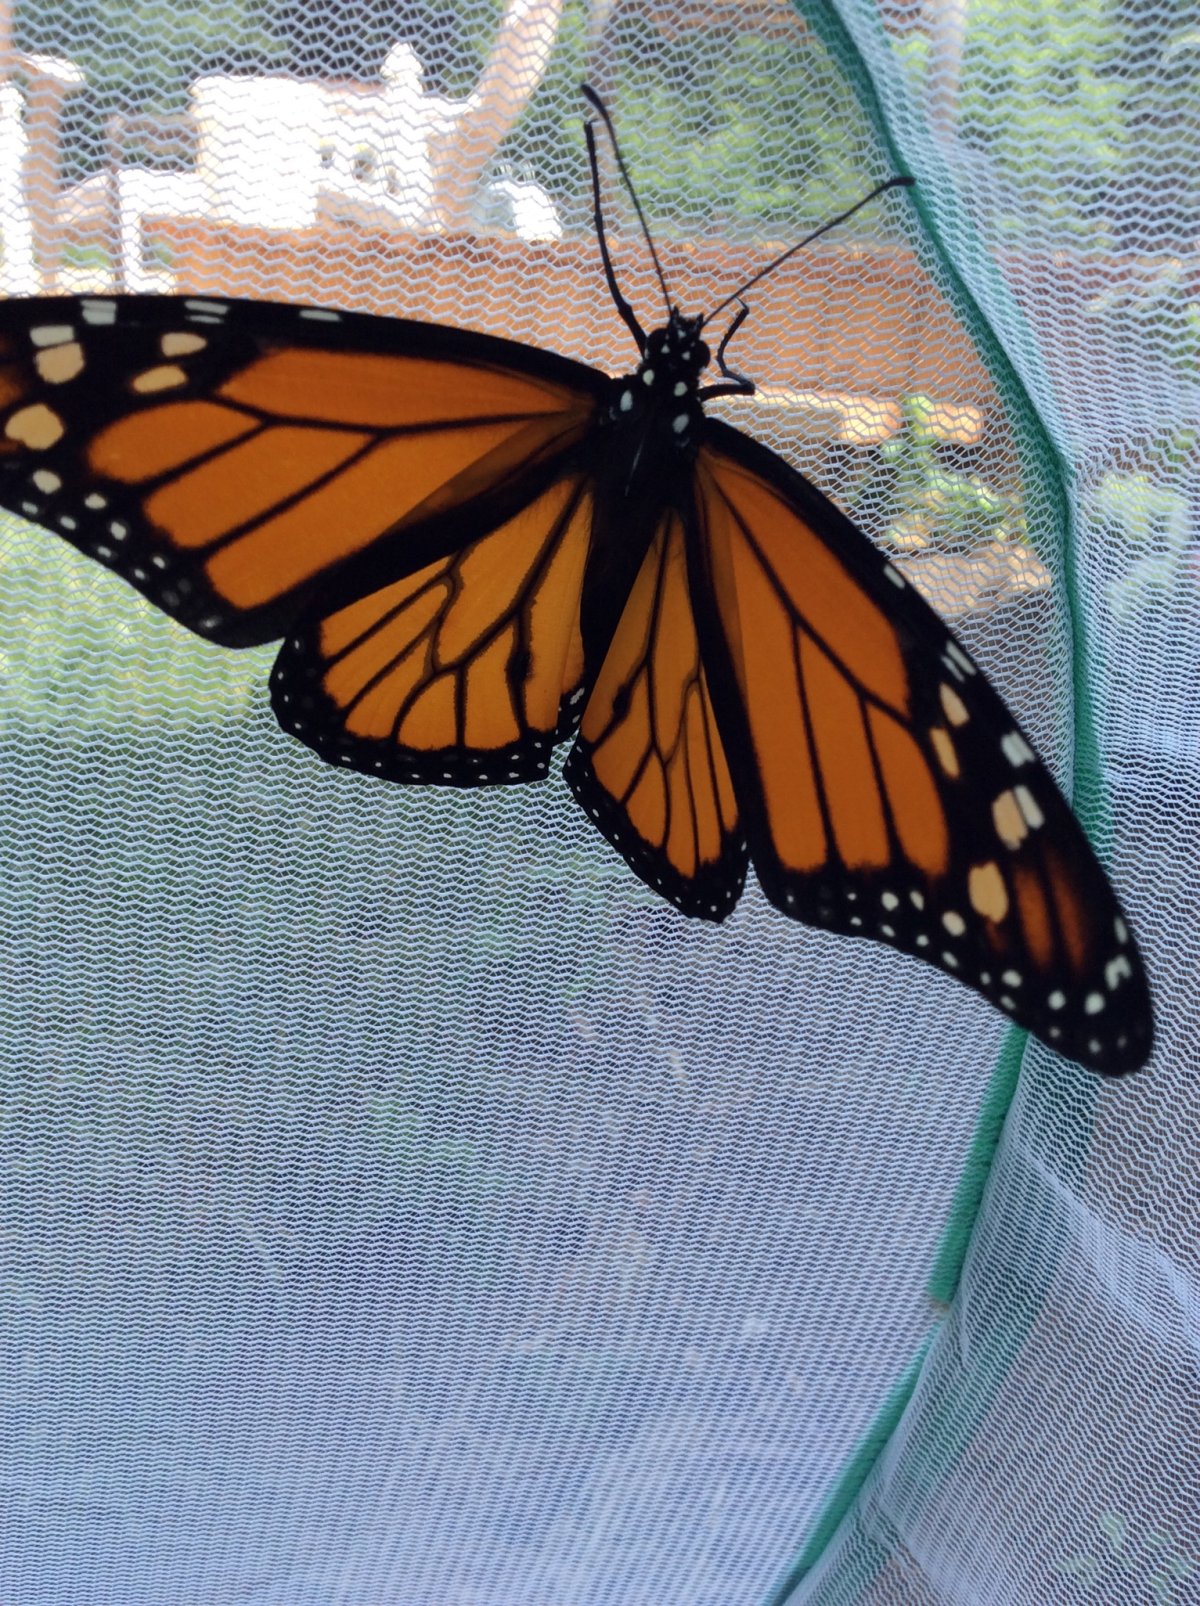 Fotherby has released a total of 184 monarch butterflies back into the wild.